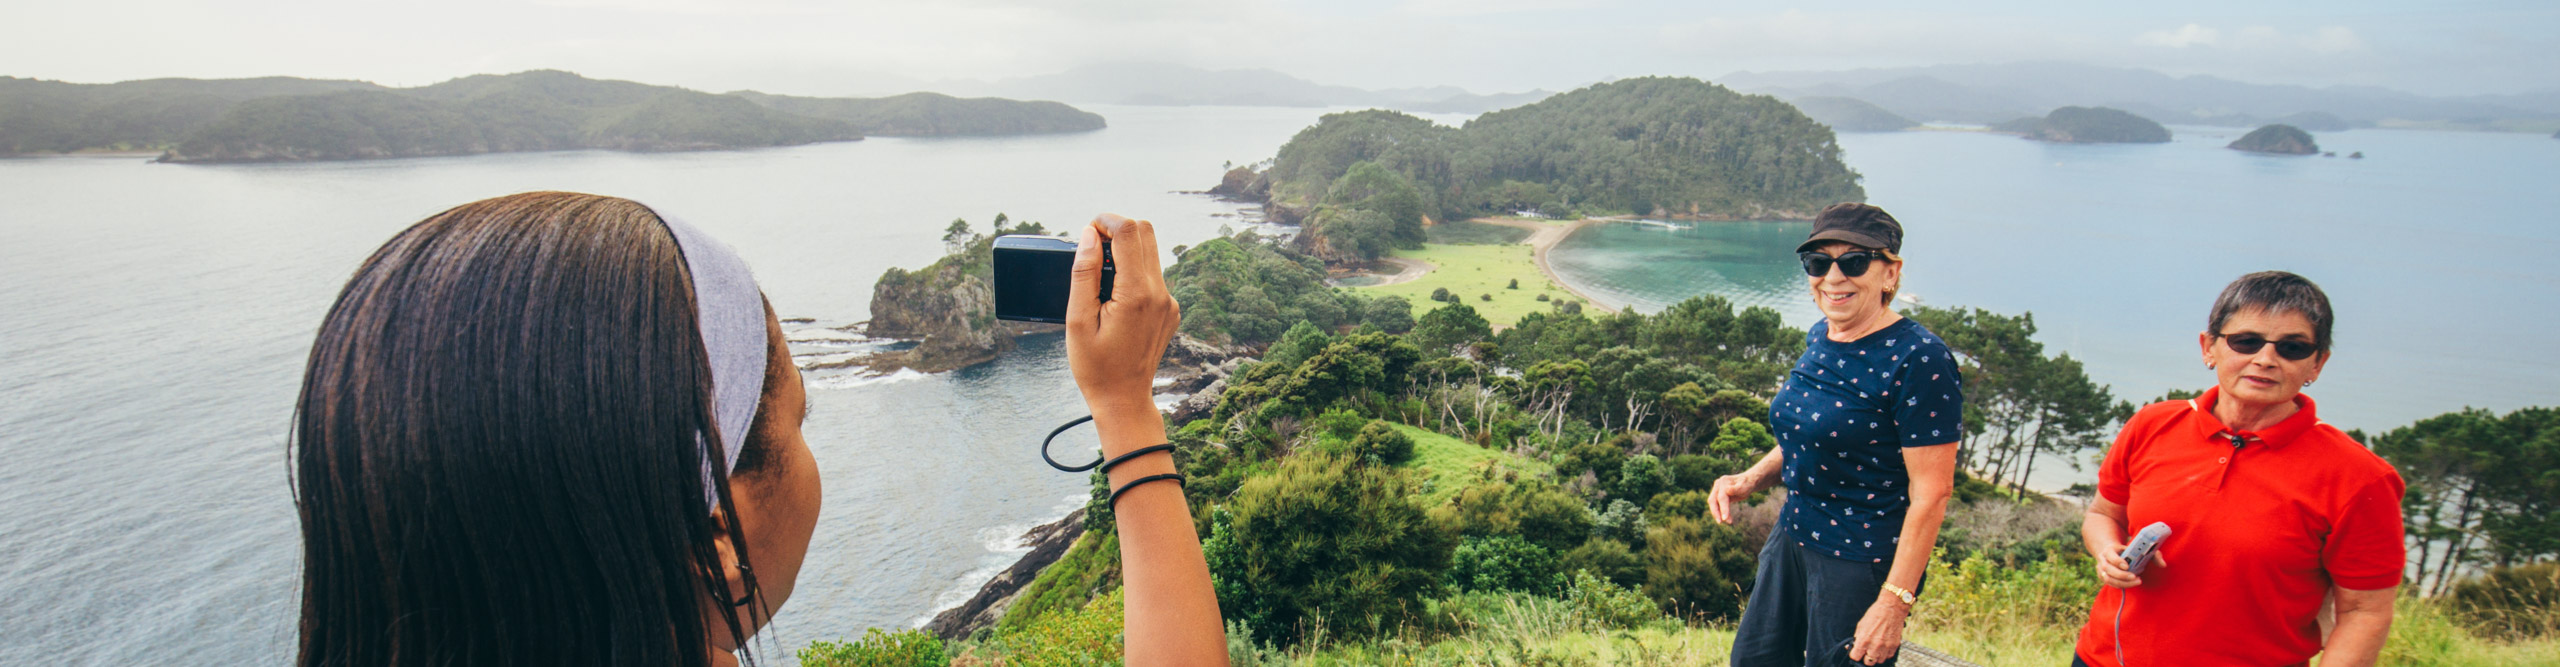 Hiker taking photos on the path down to a beach in the Bay Of Islands, New Zealand